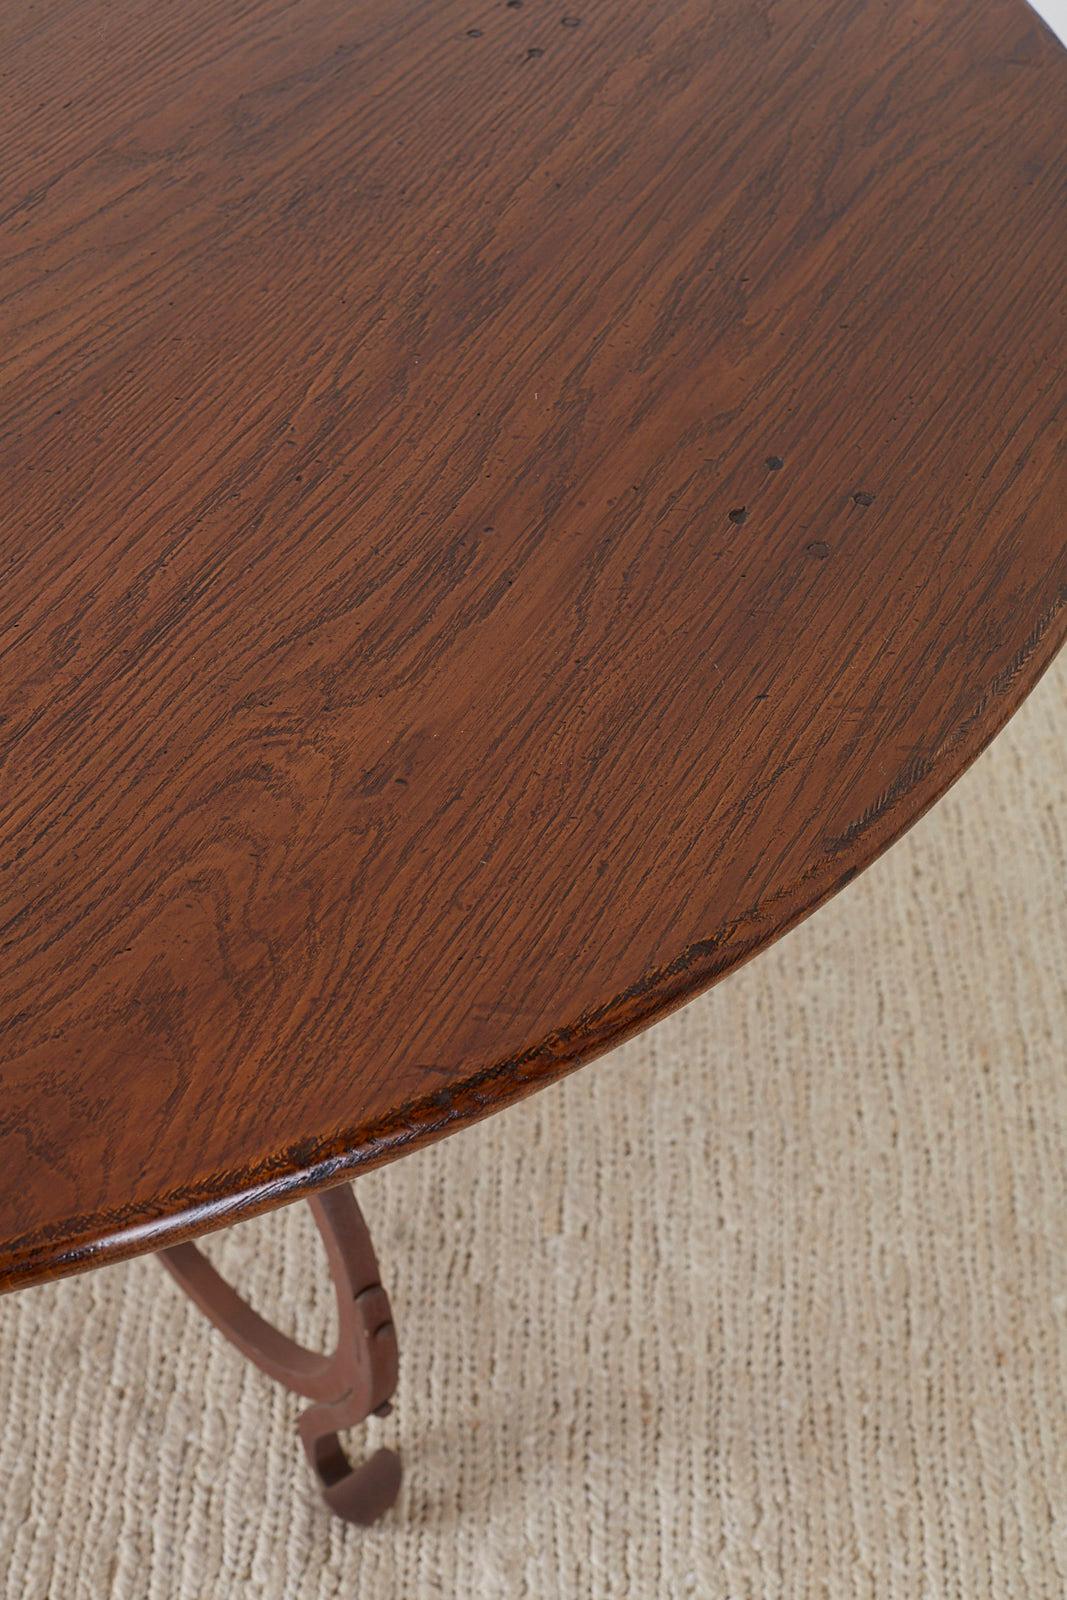 Italian Oak and Scrolled Iron Round Dining Table 4